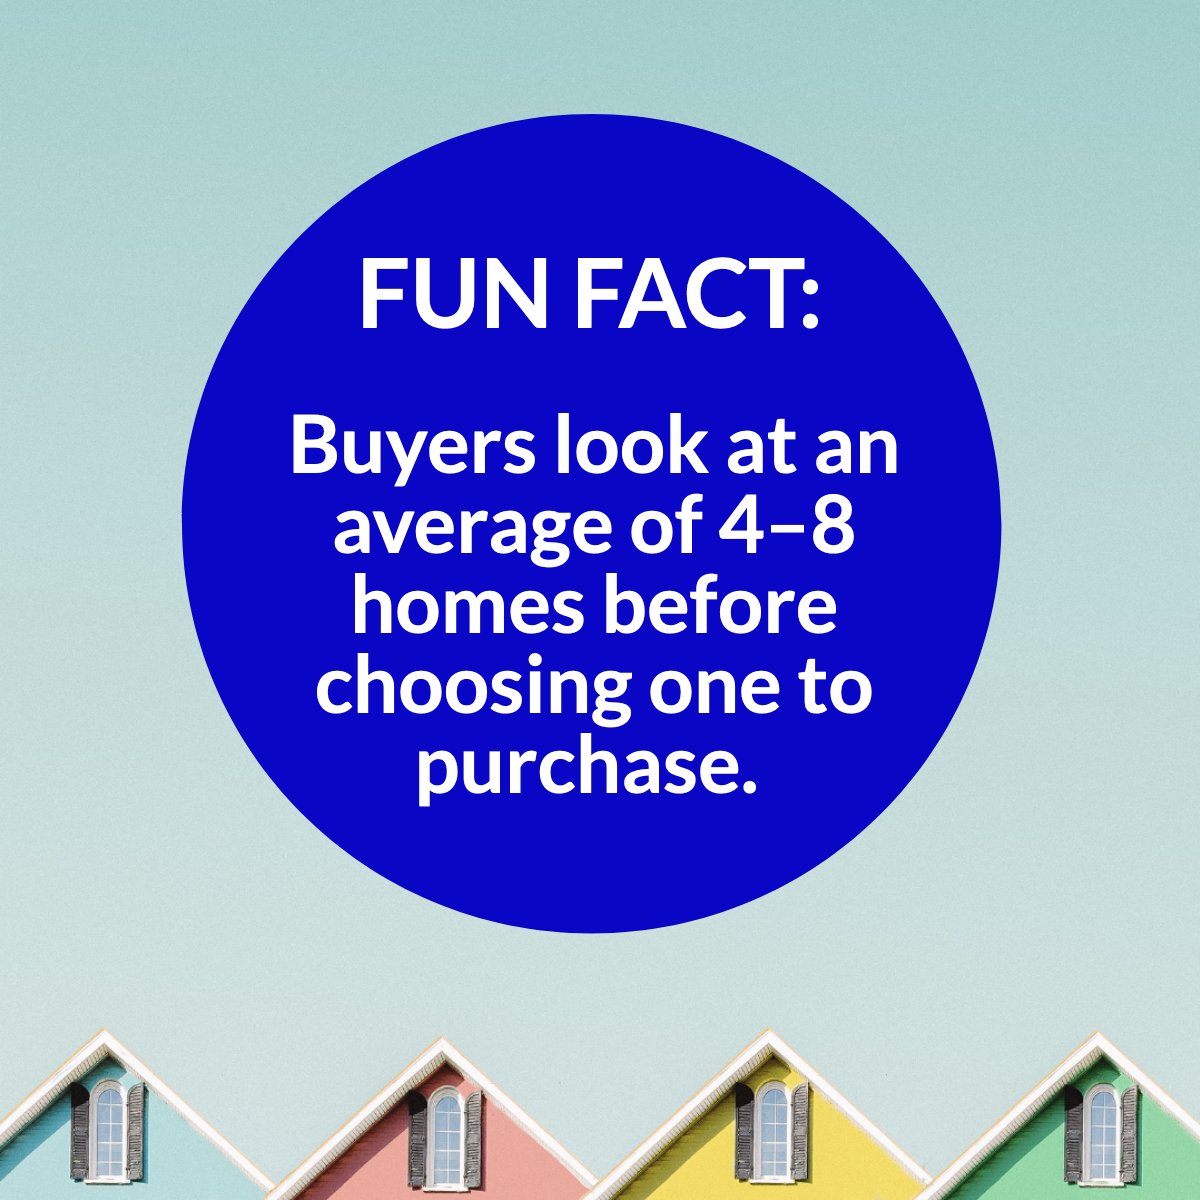 Fun Fact about buyers! 🏡 #realestatefacts #realestate #didyouknow